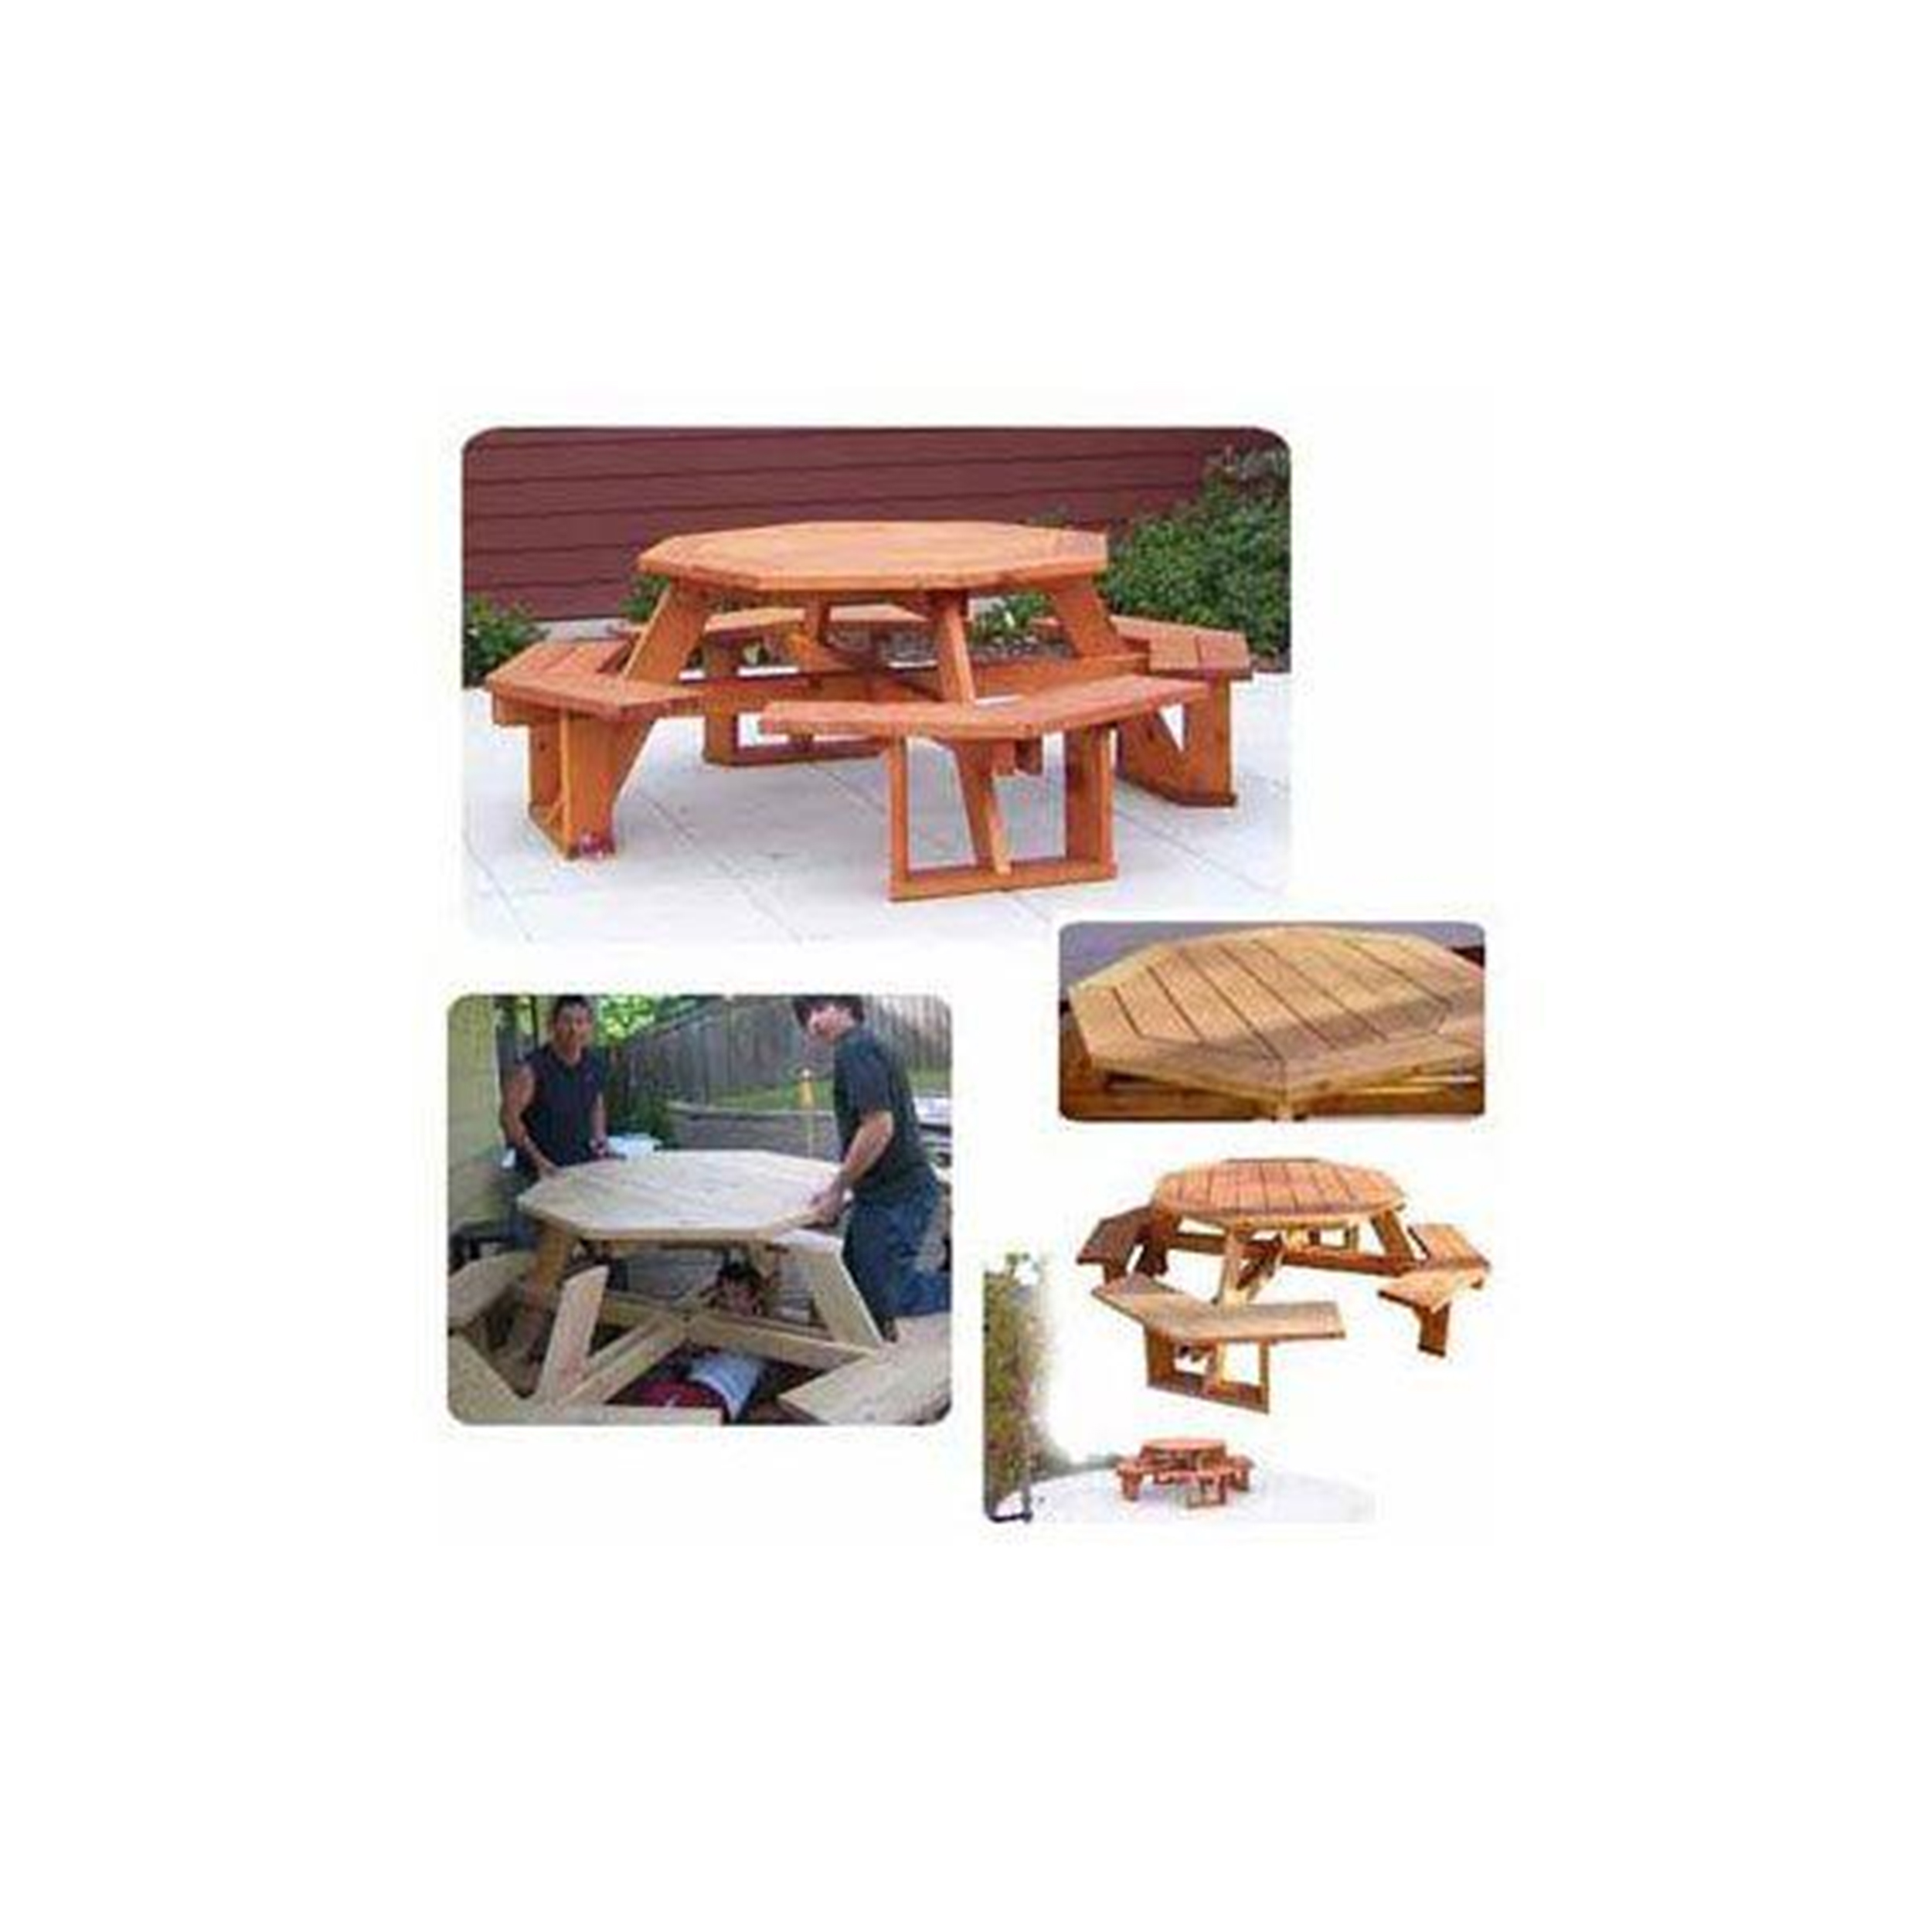 Woodworking Project Paper Plan to Build Octagon Picnic Table